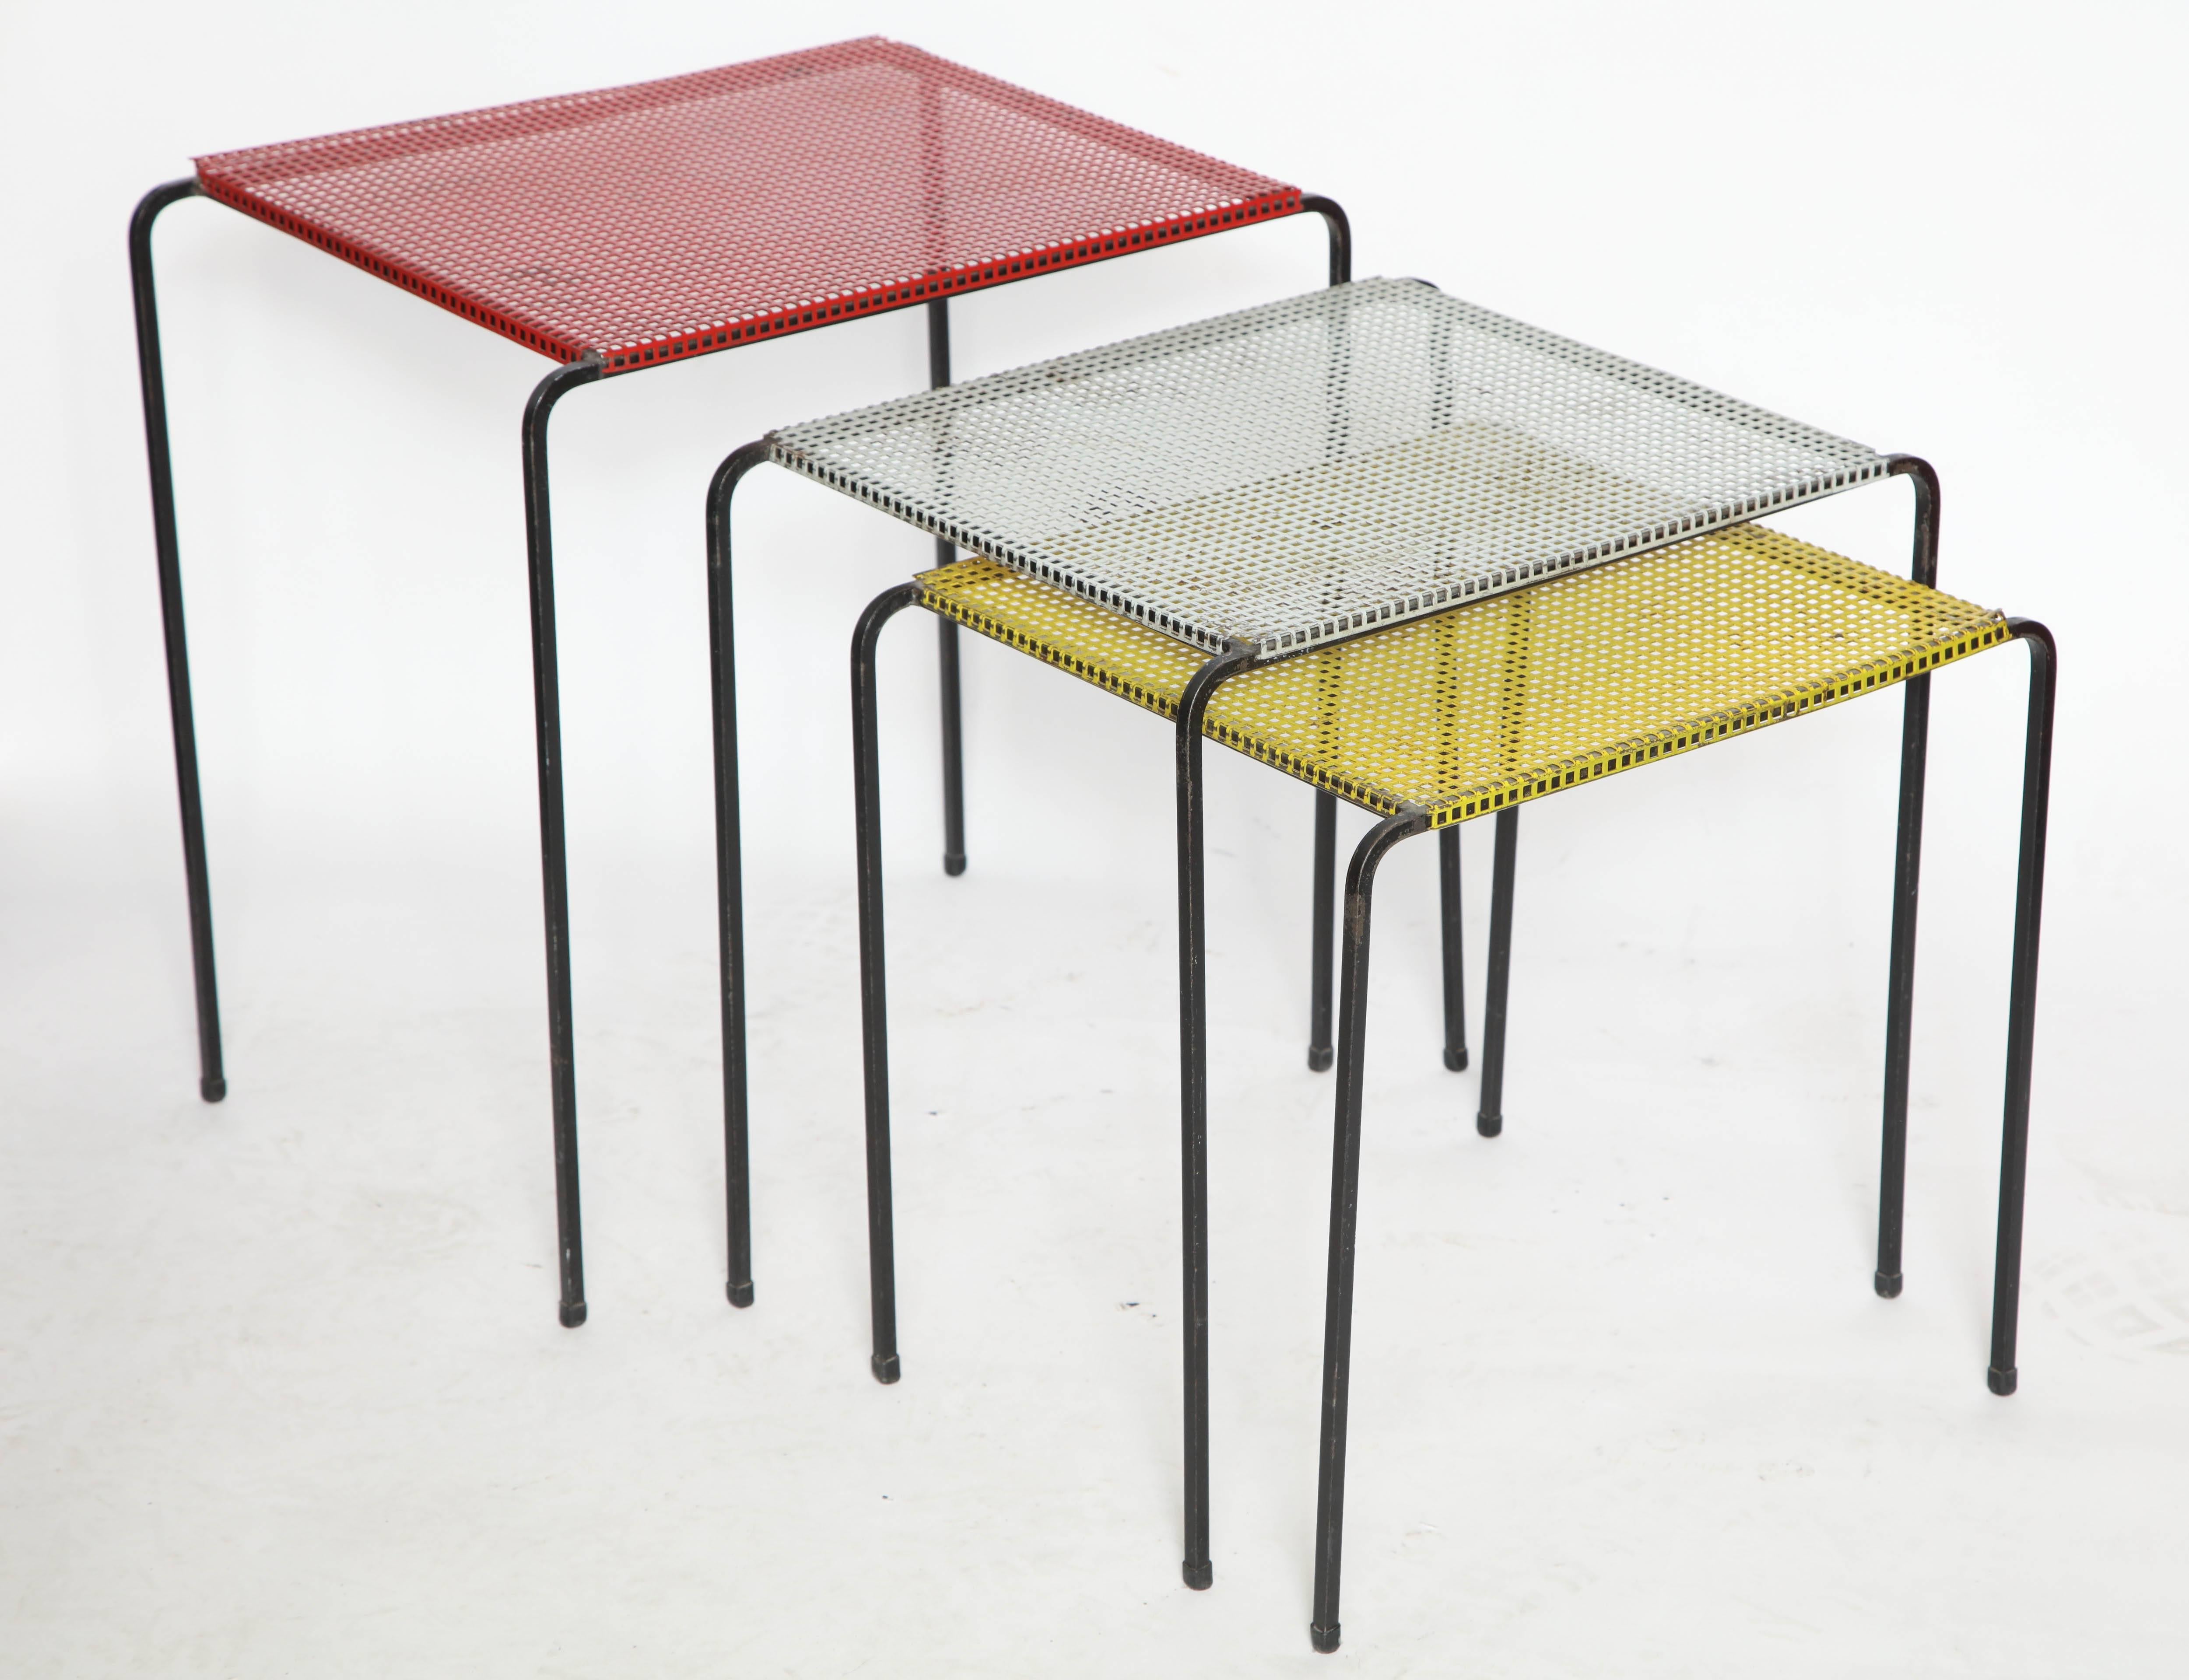 Painted Attributed to Mategot Mid-Century Modern Metal Nesting Tables, France, 1950s